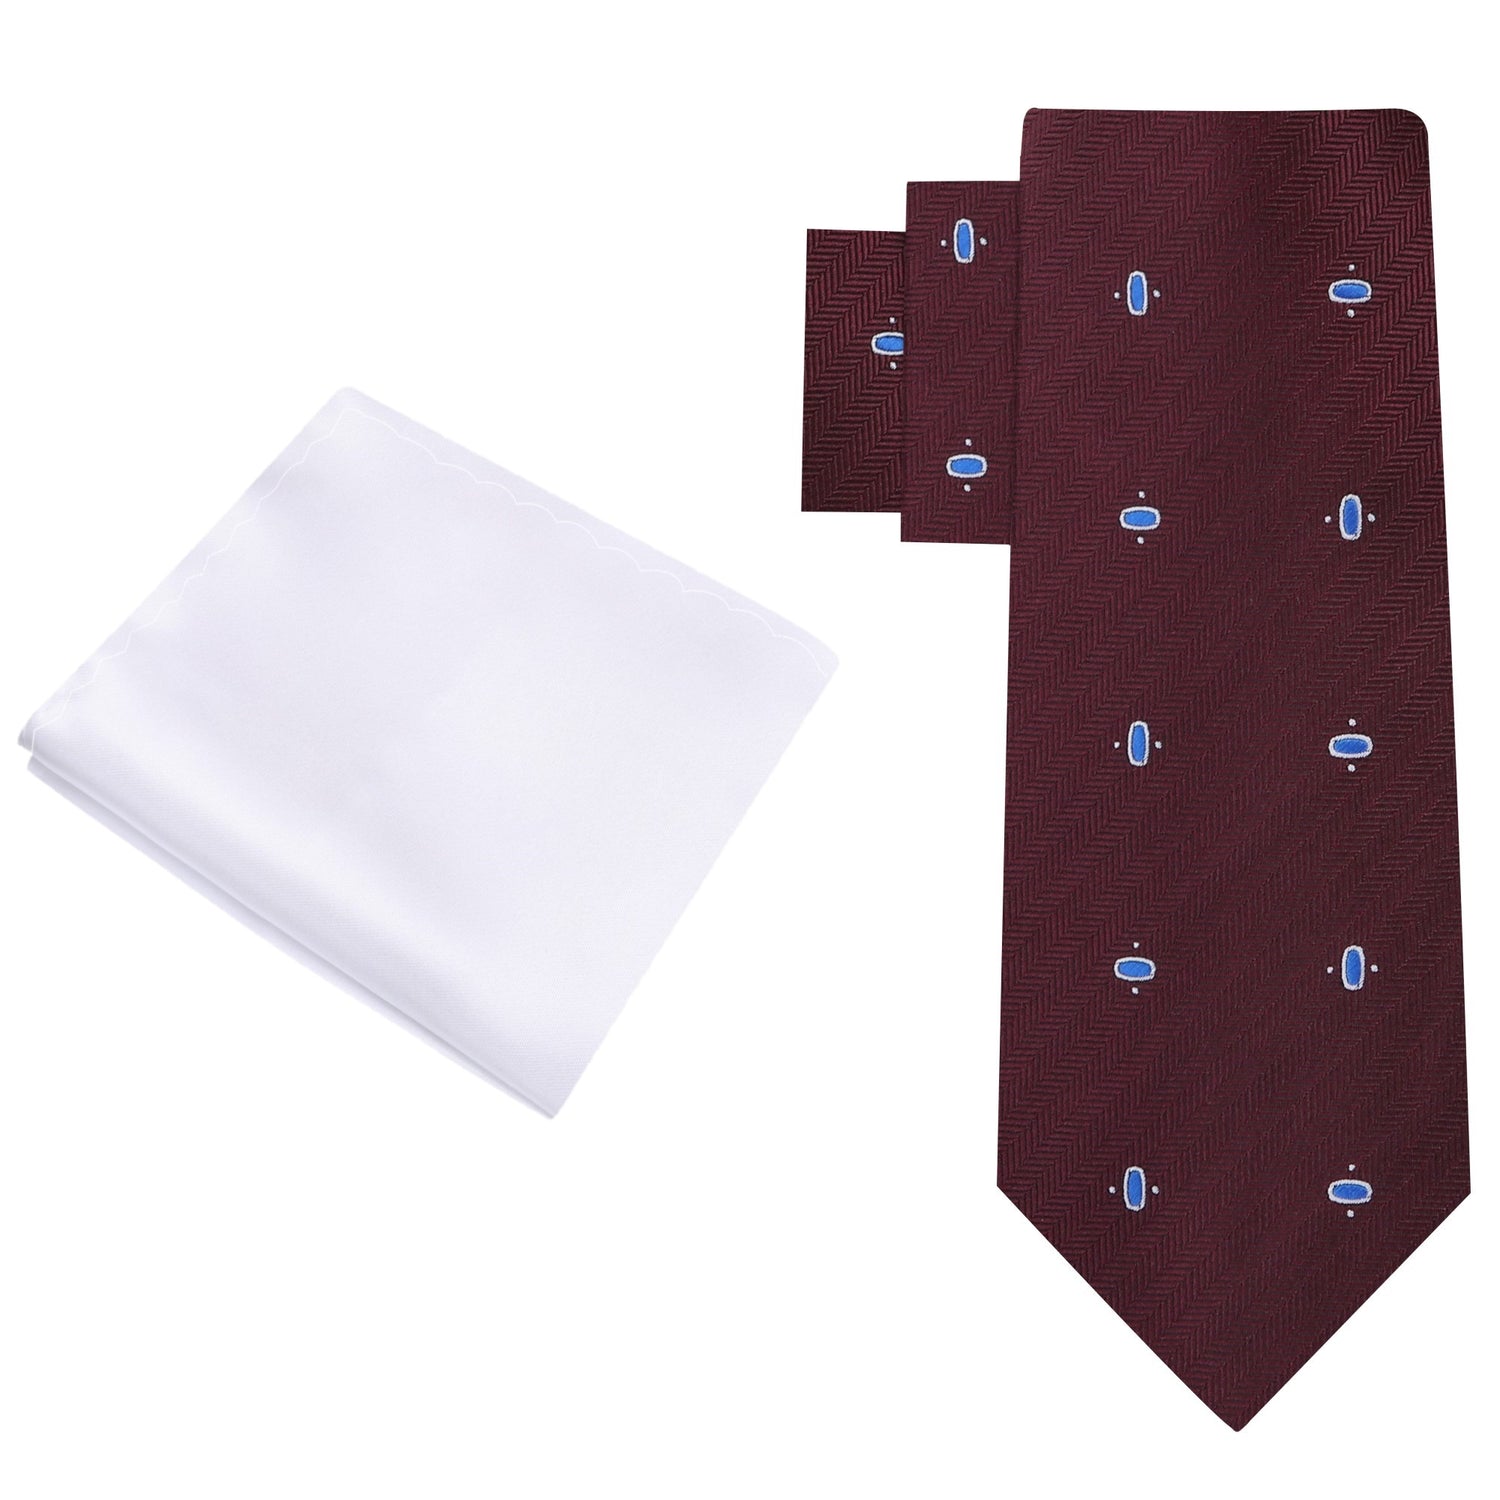 Alt: Brown Blue Oval Necktie with White Square